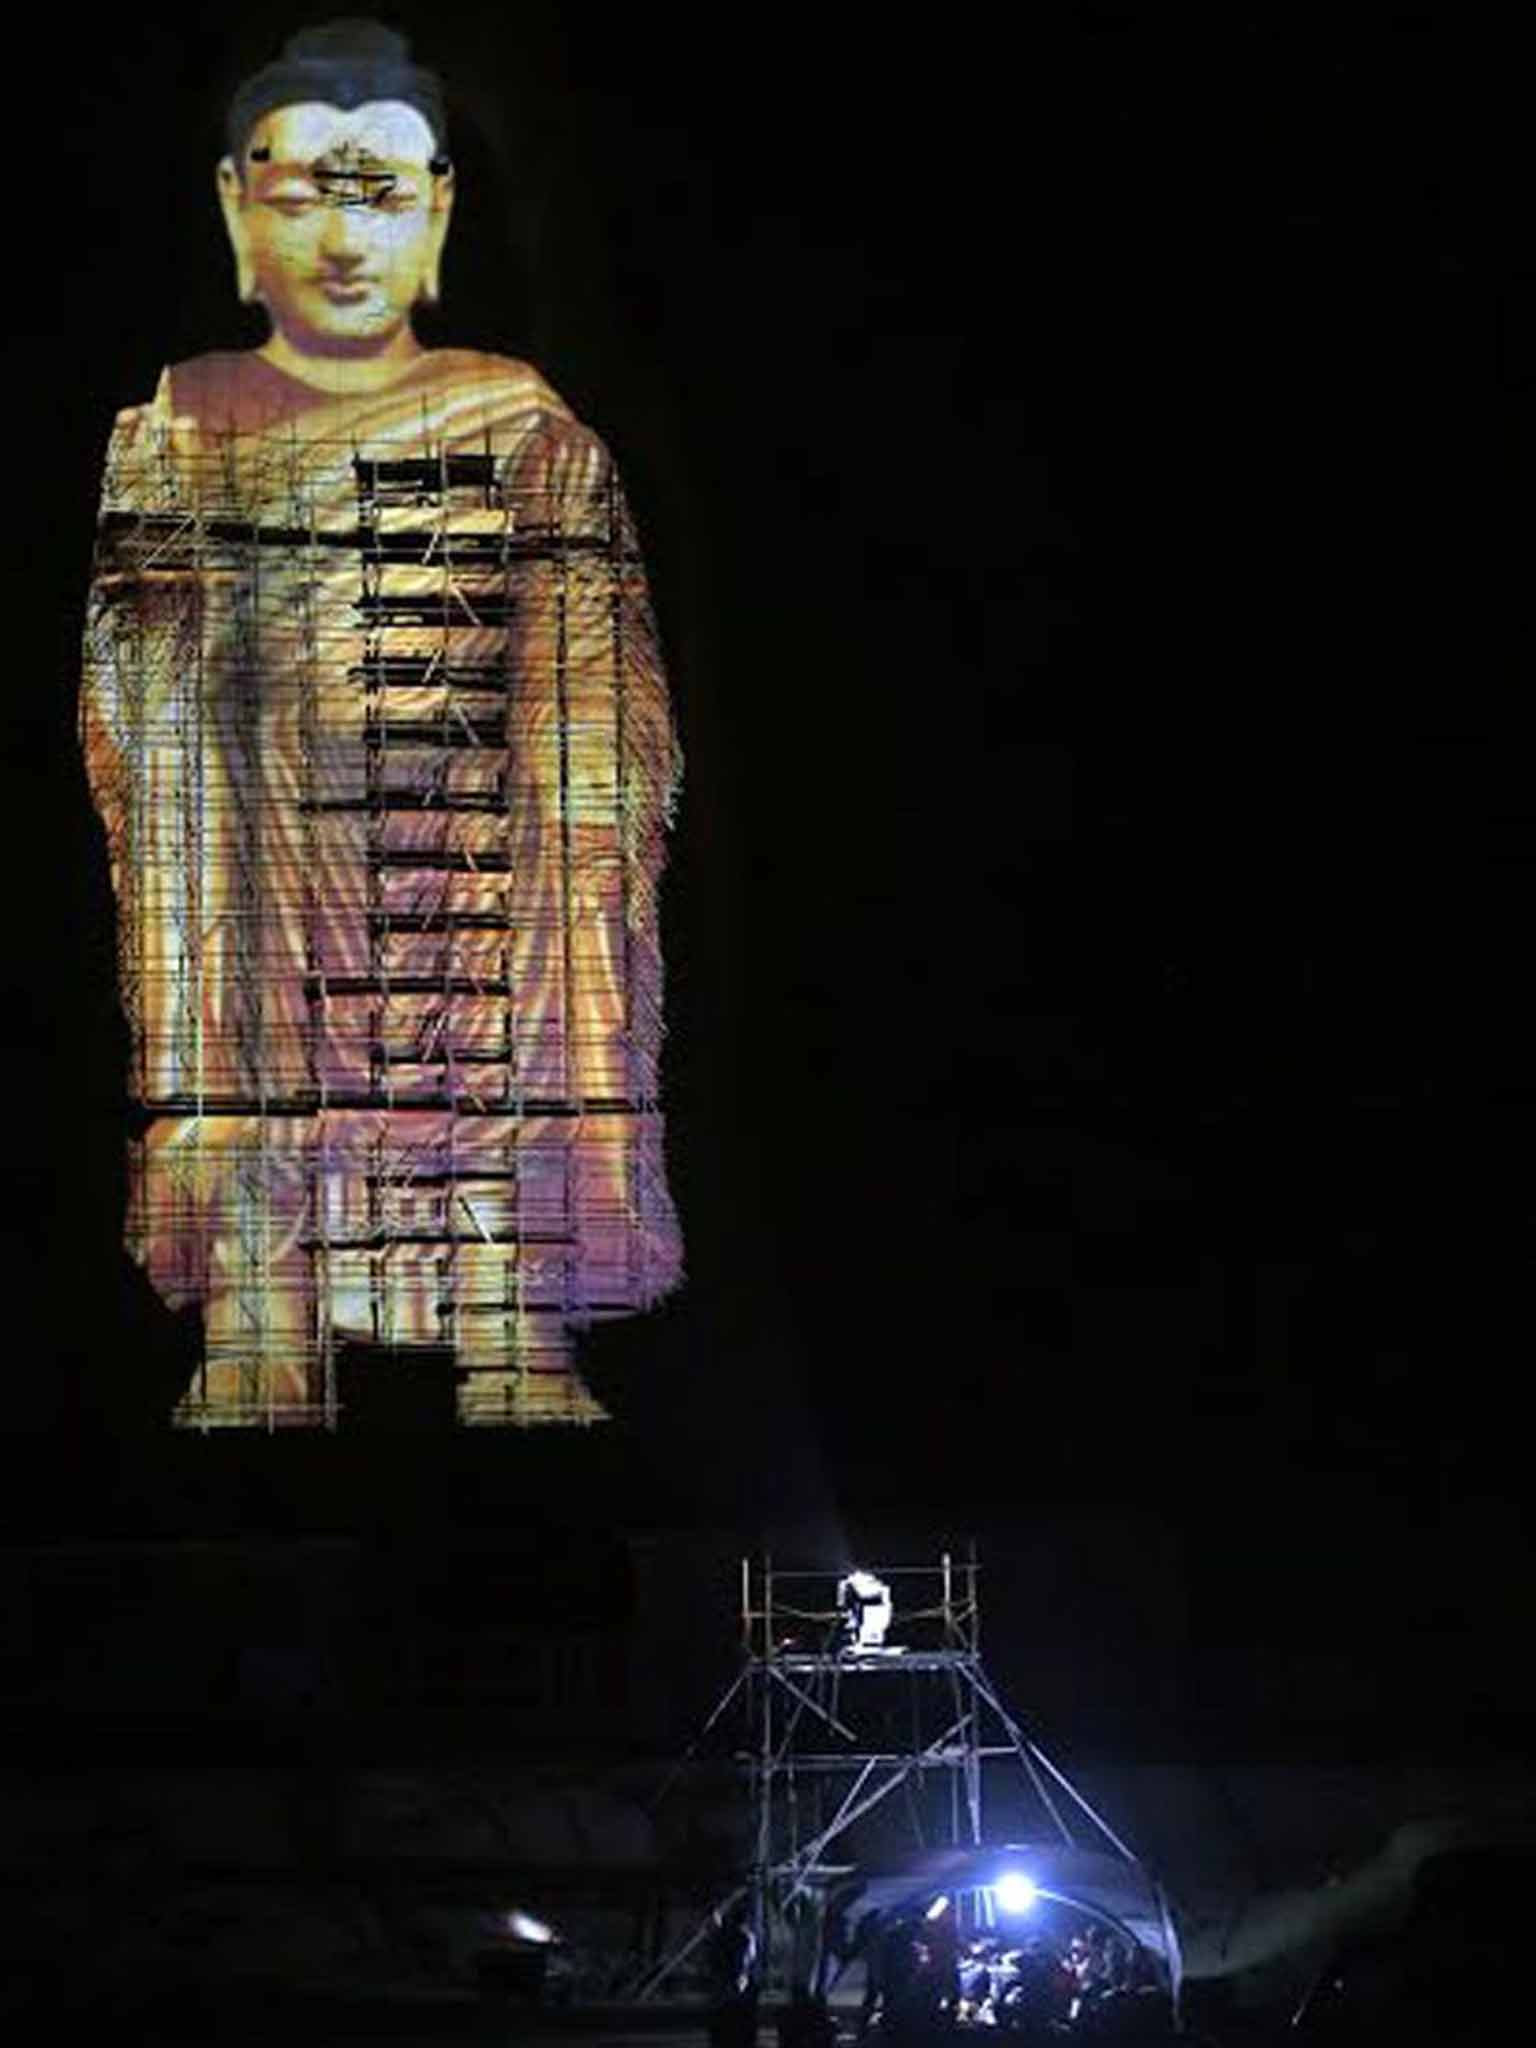 &#13;
Ancient and modern: a projected image of the site of a Buddha statue razed in 2001 from June this year&#13;